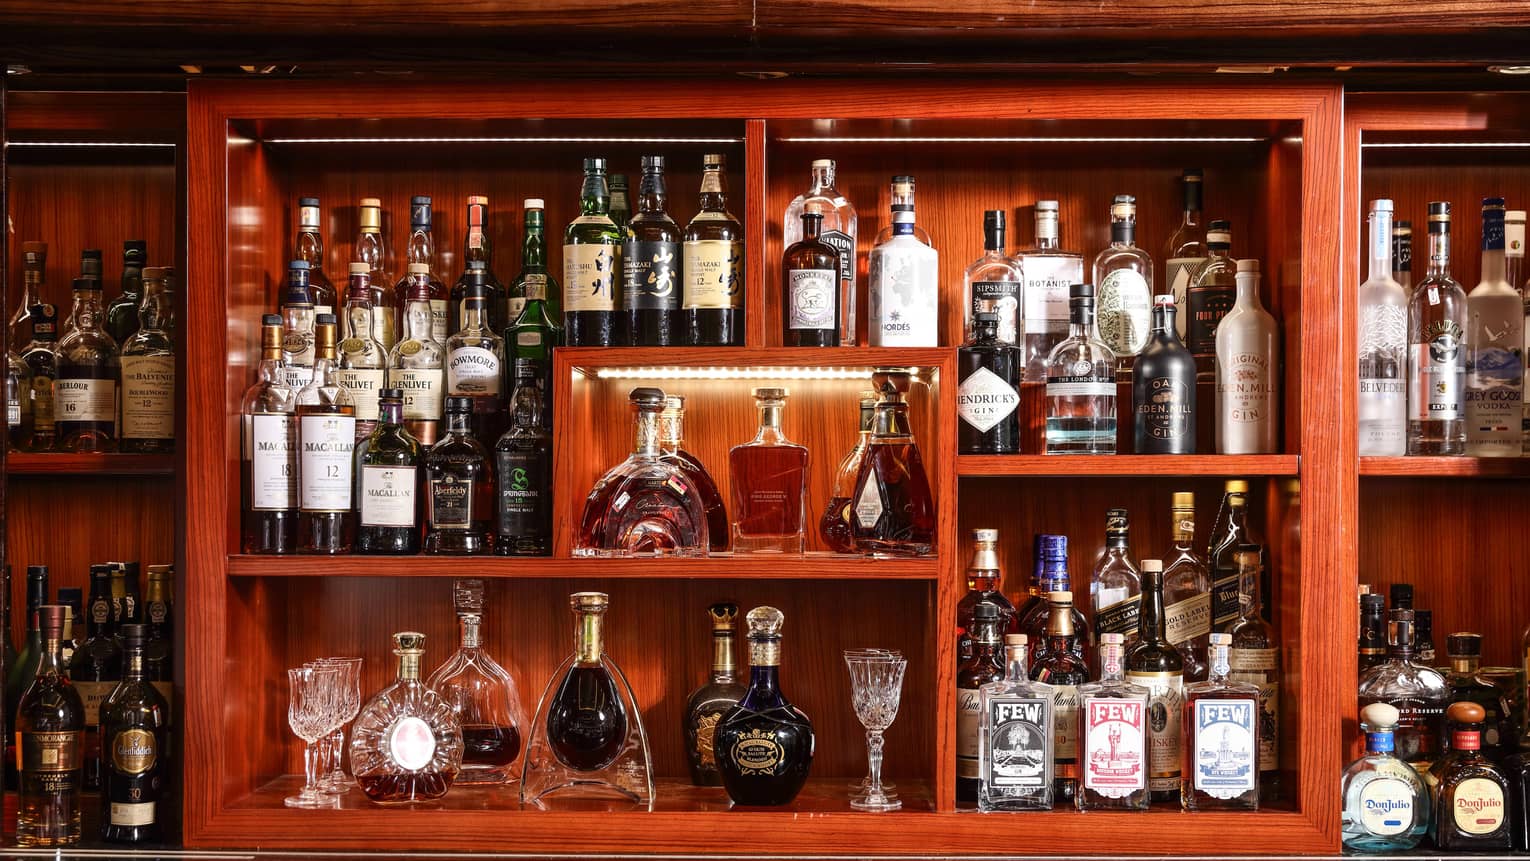 Wood back bar display lined with lights, with rows of liquor bottles